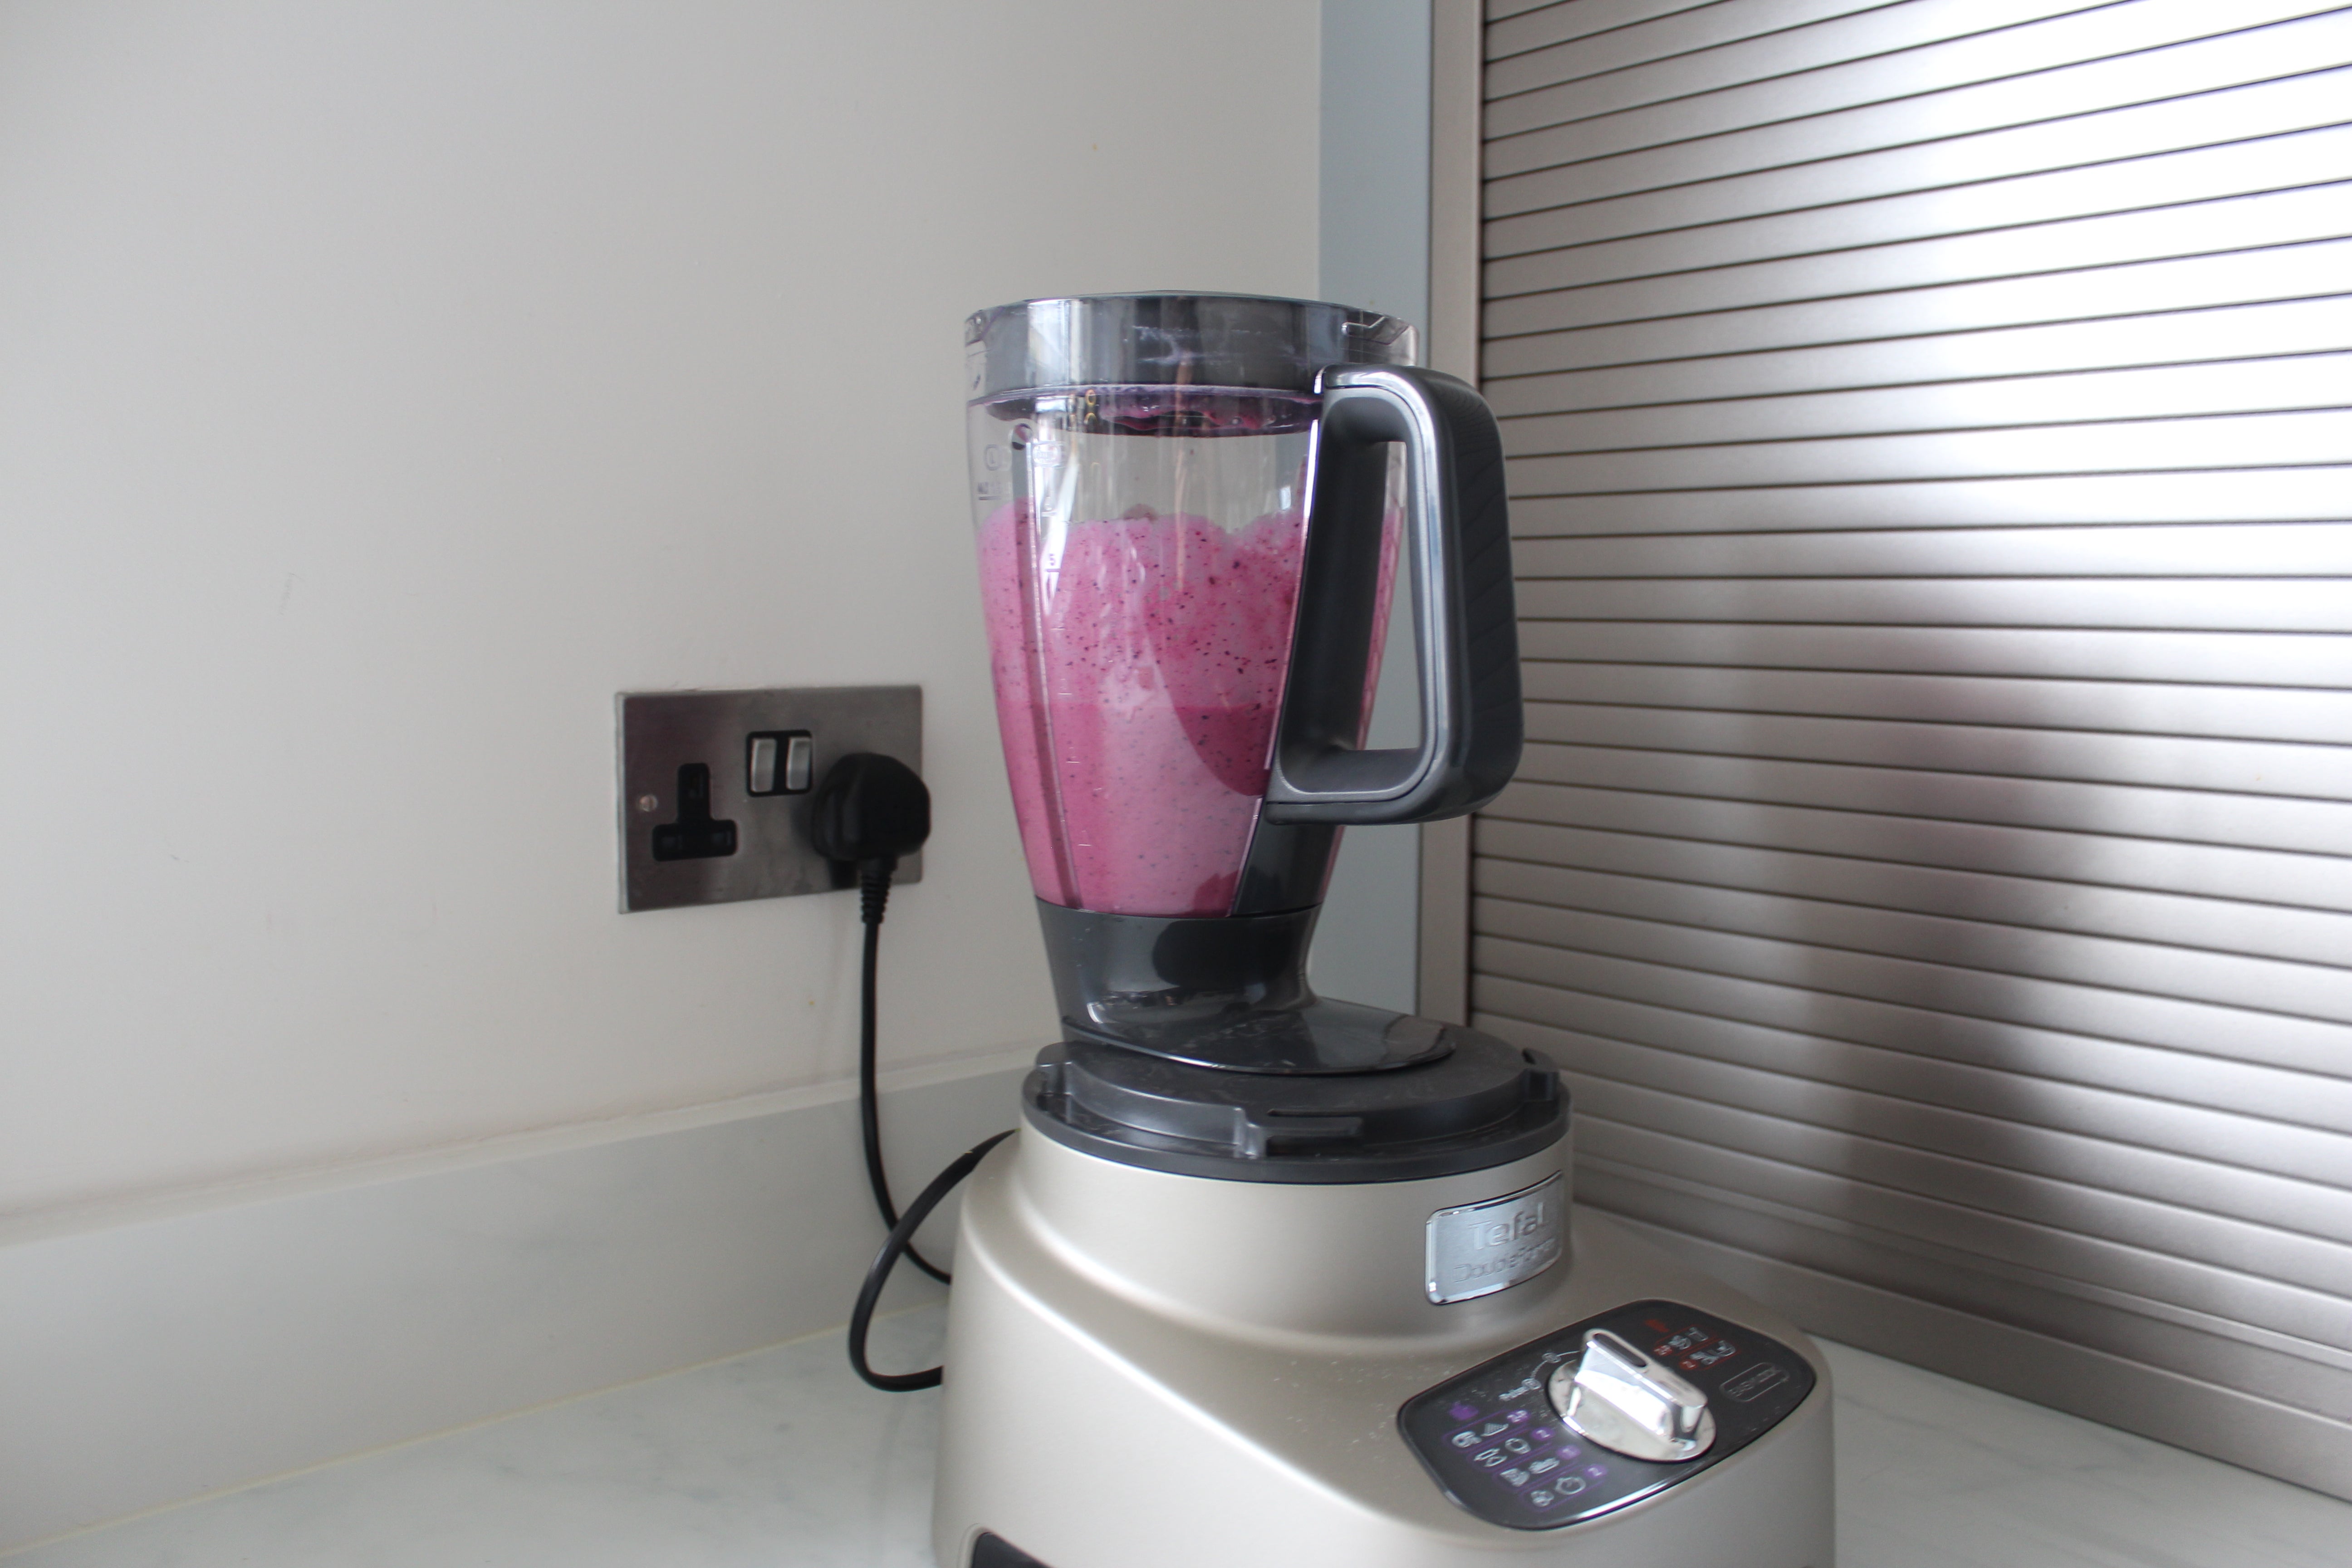 Tefal DoubleForce Pro Food Processor with berry smoothie.